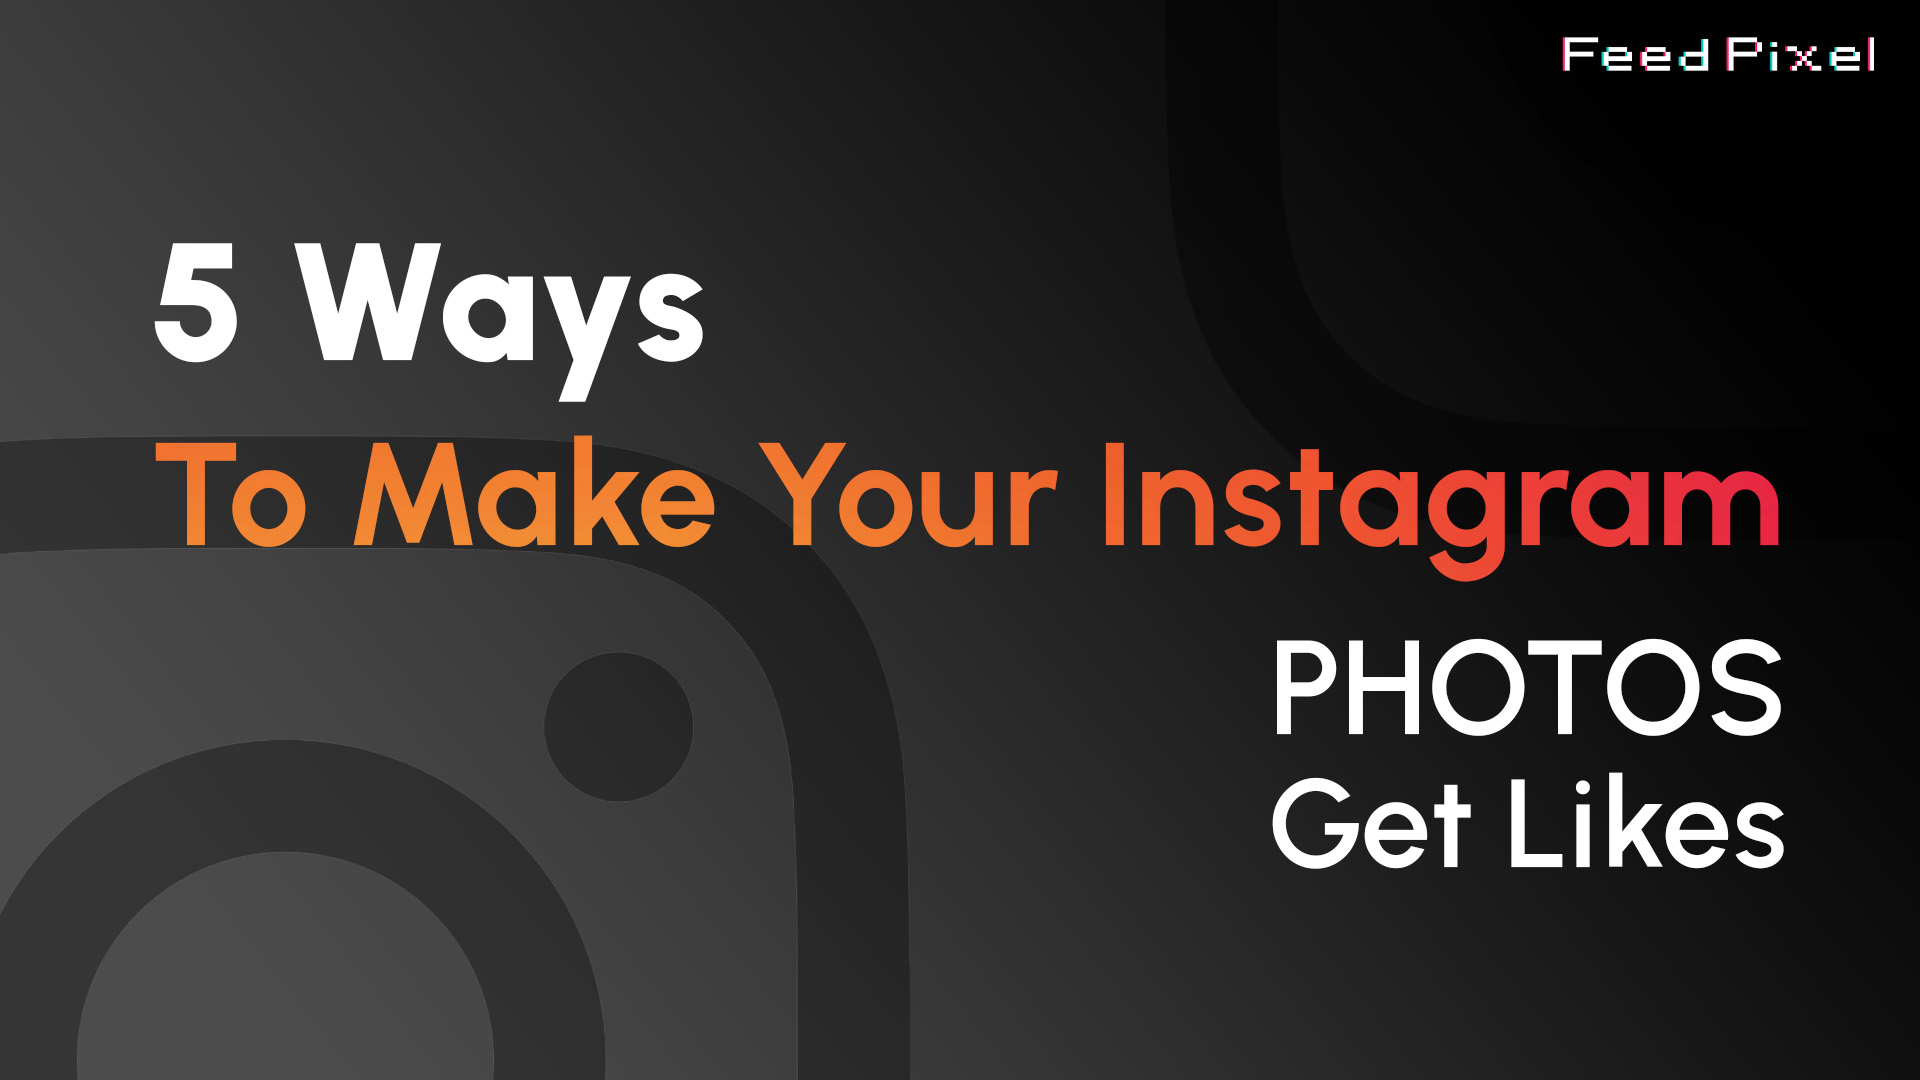 5 Amazing Ways to Make Your Instagram Photos Get Likes